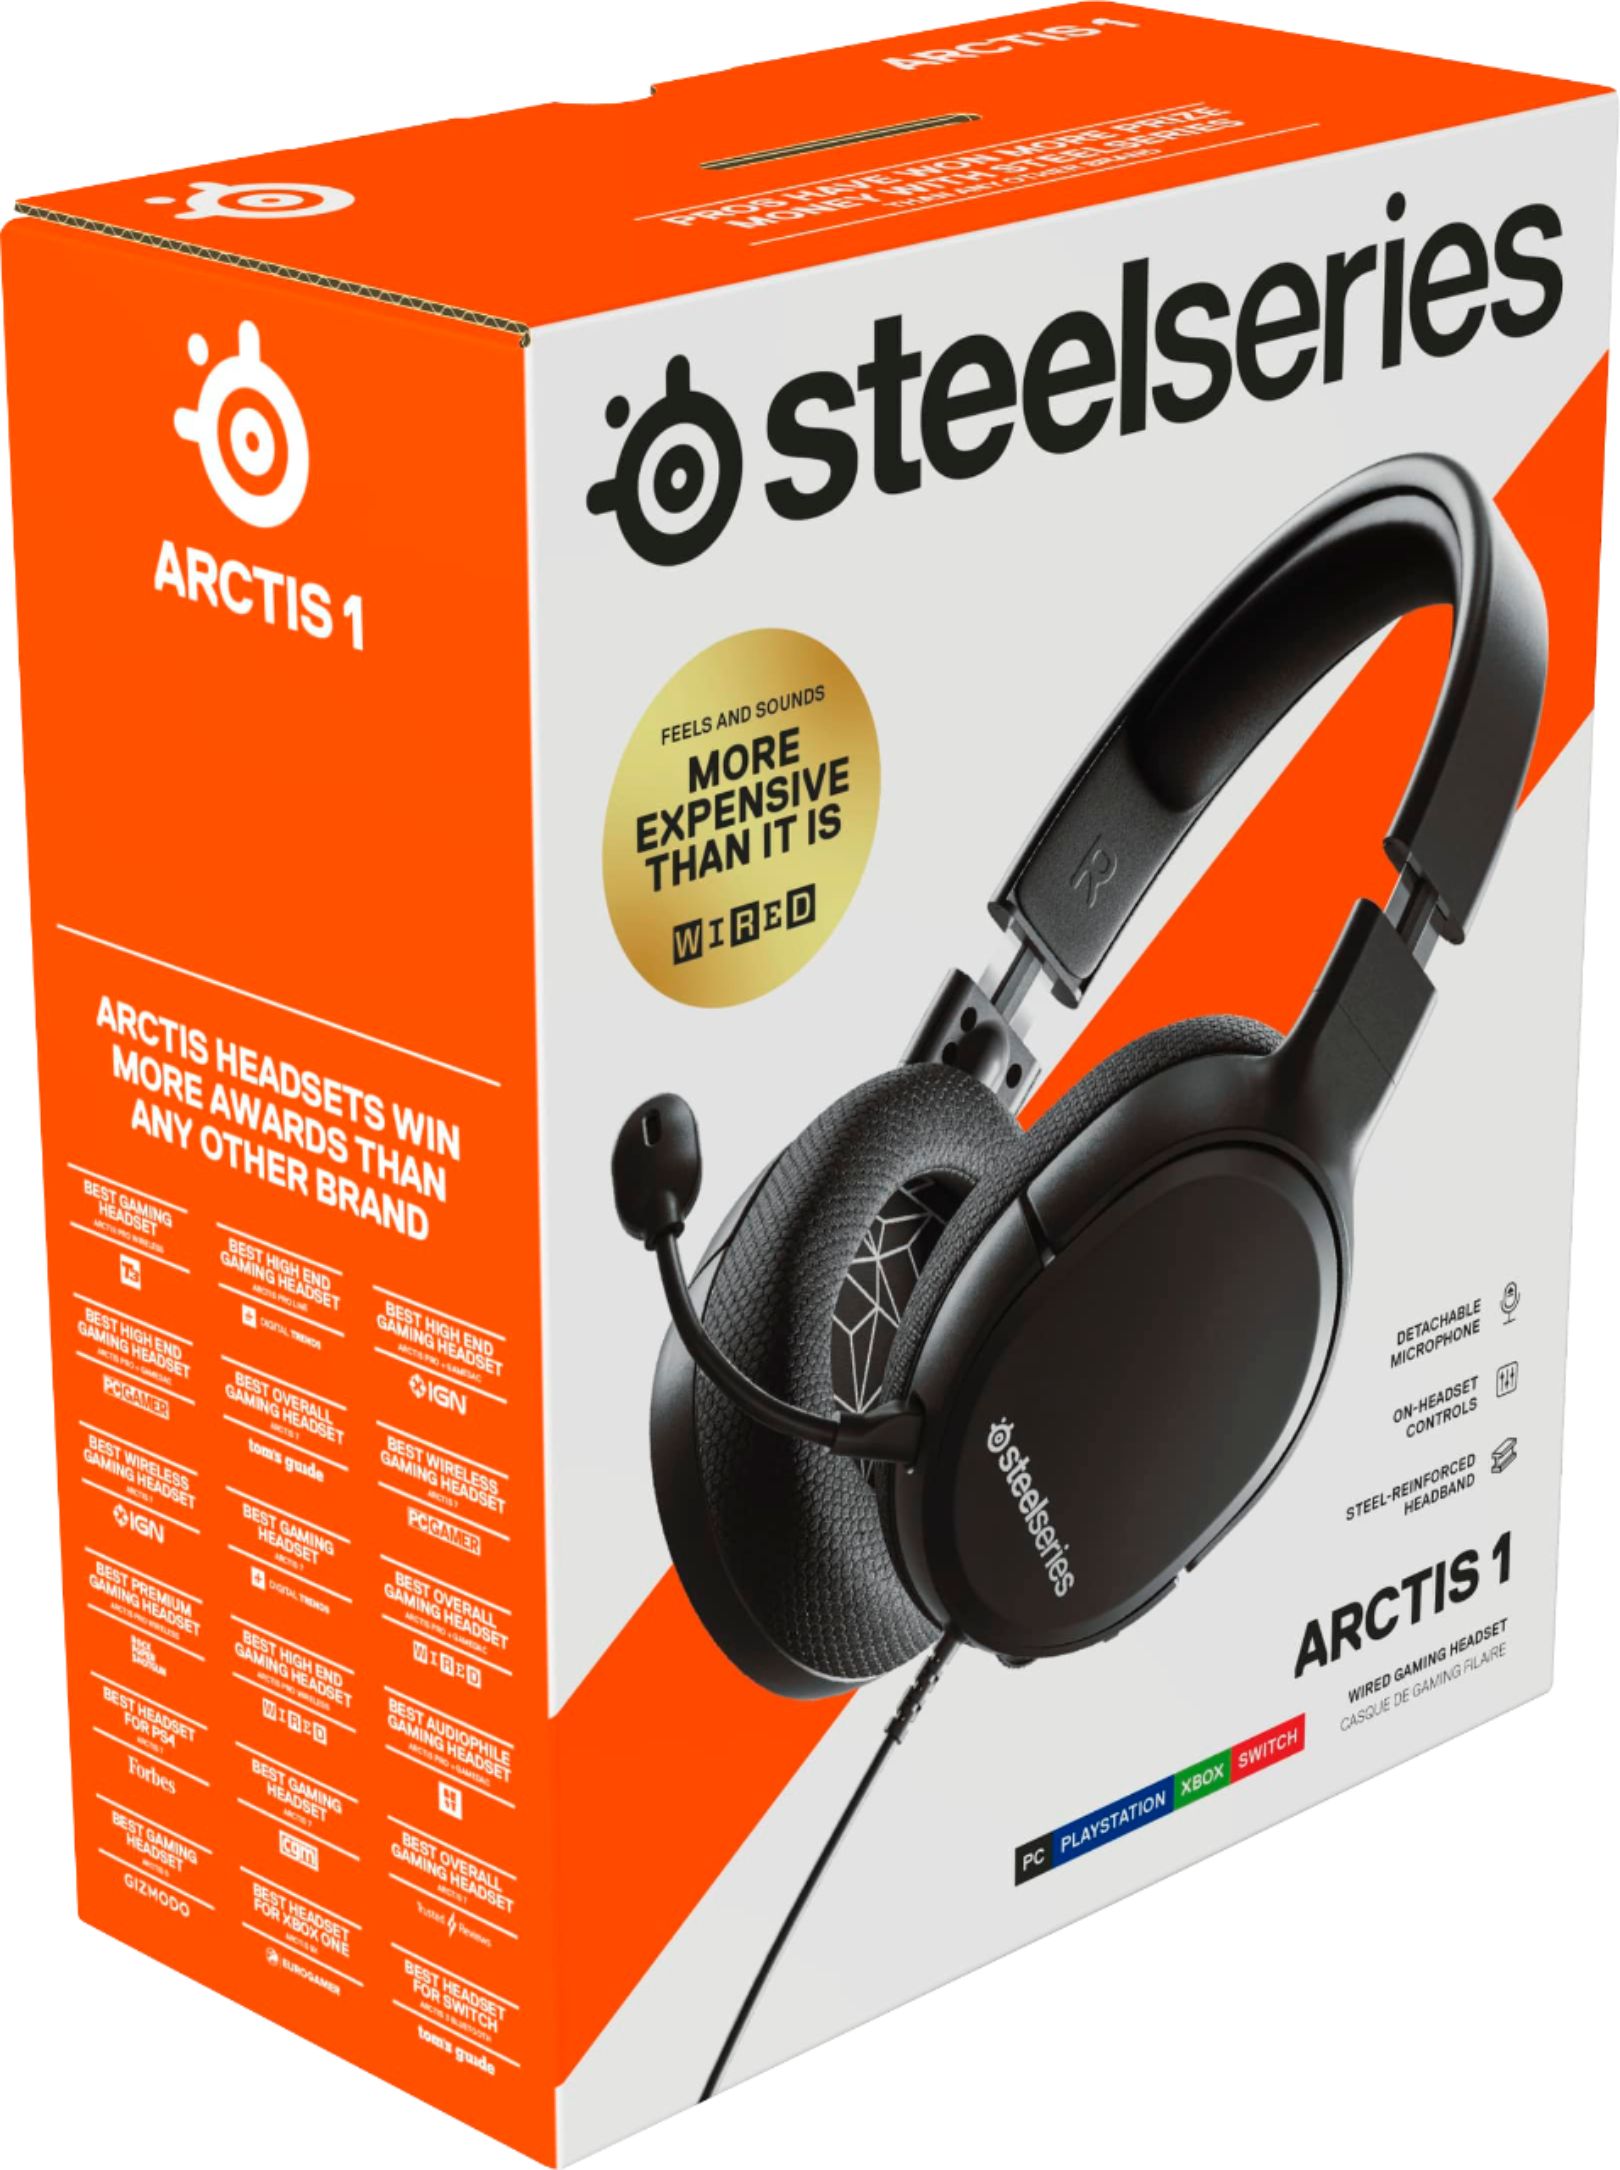 The Steel Series Arctis 1 gaming headset is just $21 on